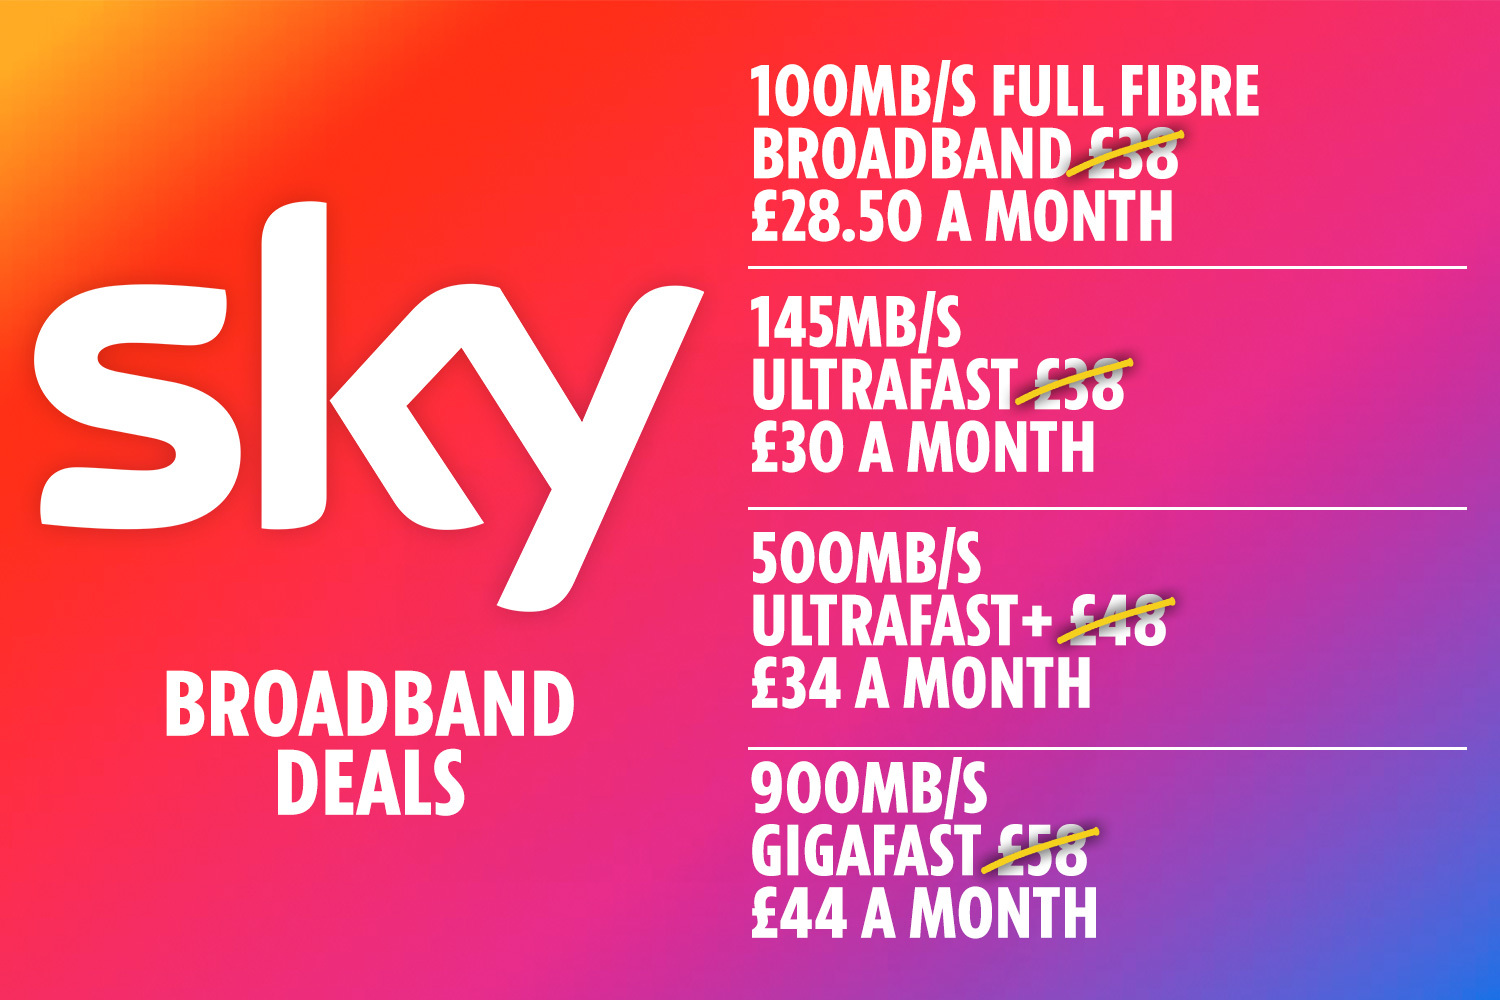 There are plenty of Sky broadband deals to shop so you spend less for more